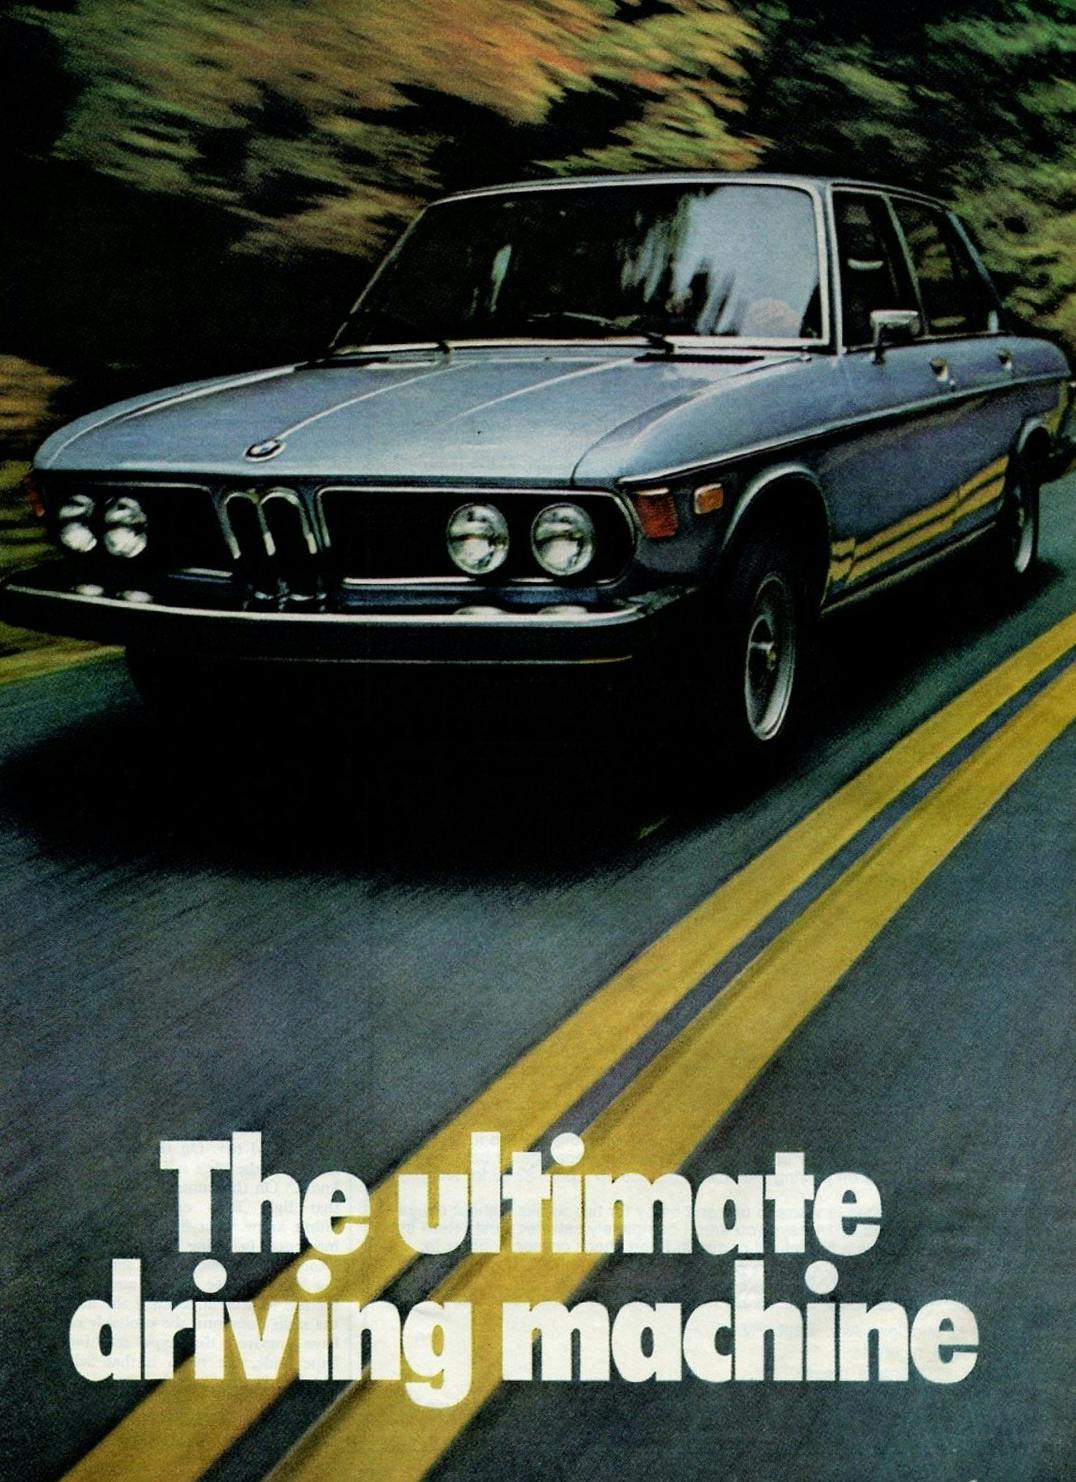 A poster for a BMW car with the 'The Ultimate Driving Machine' tagline